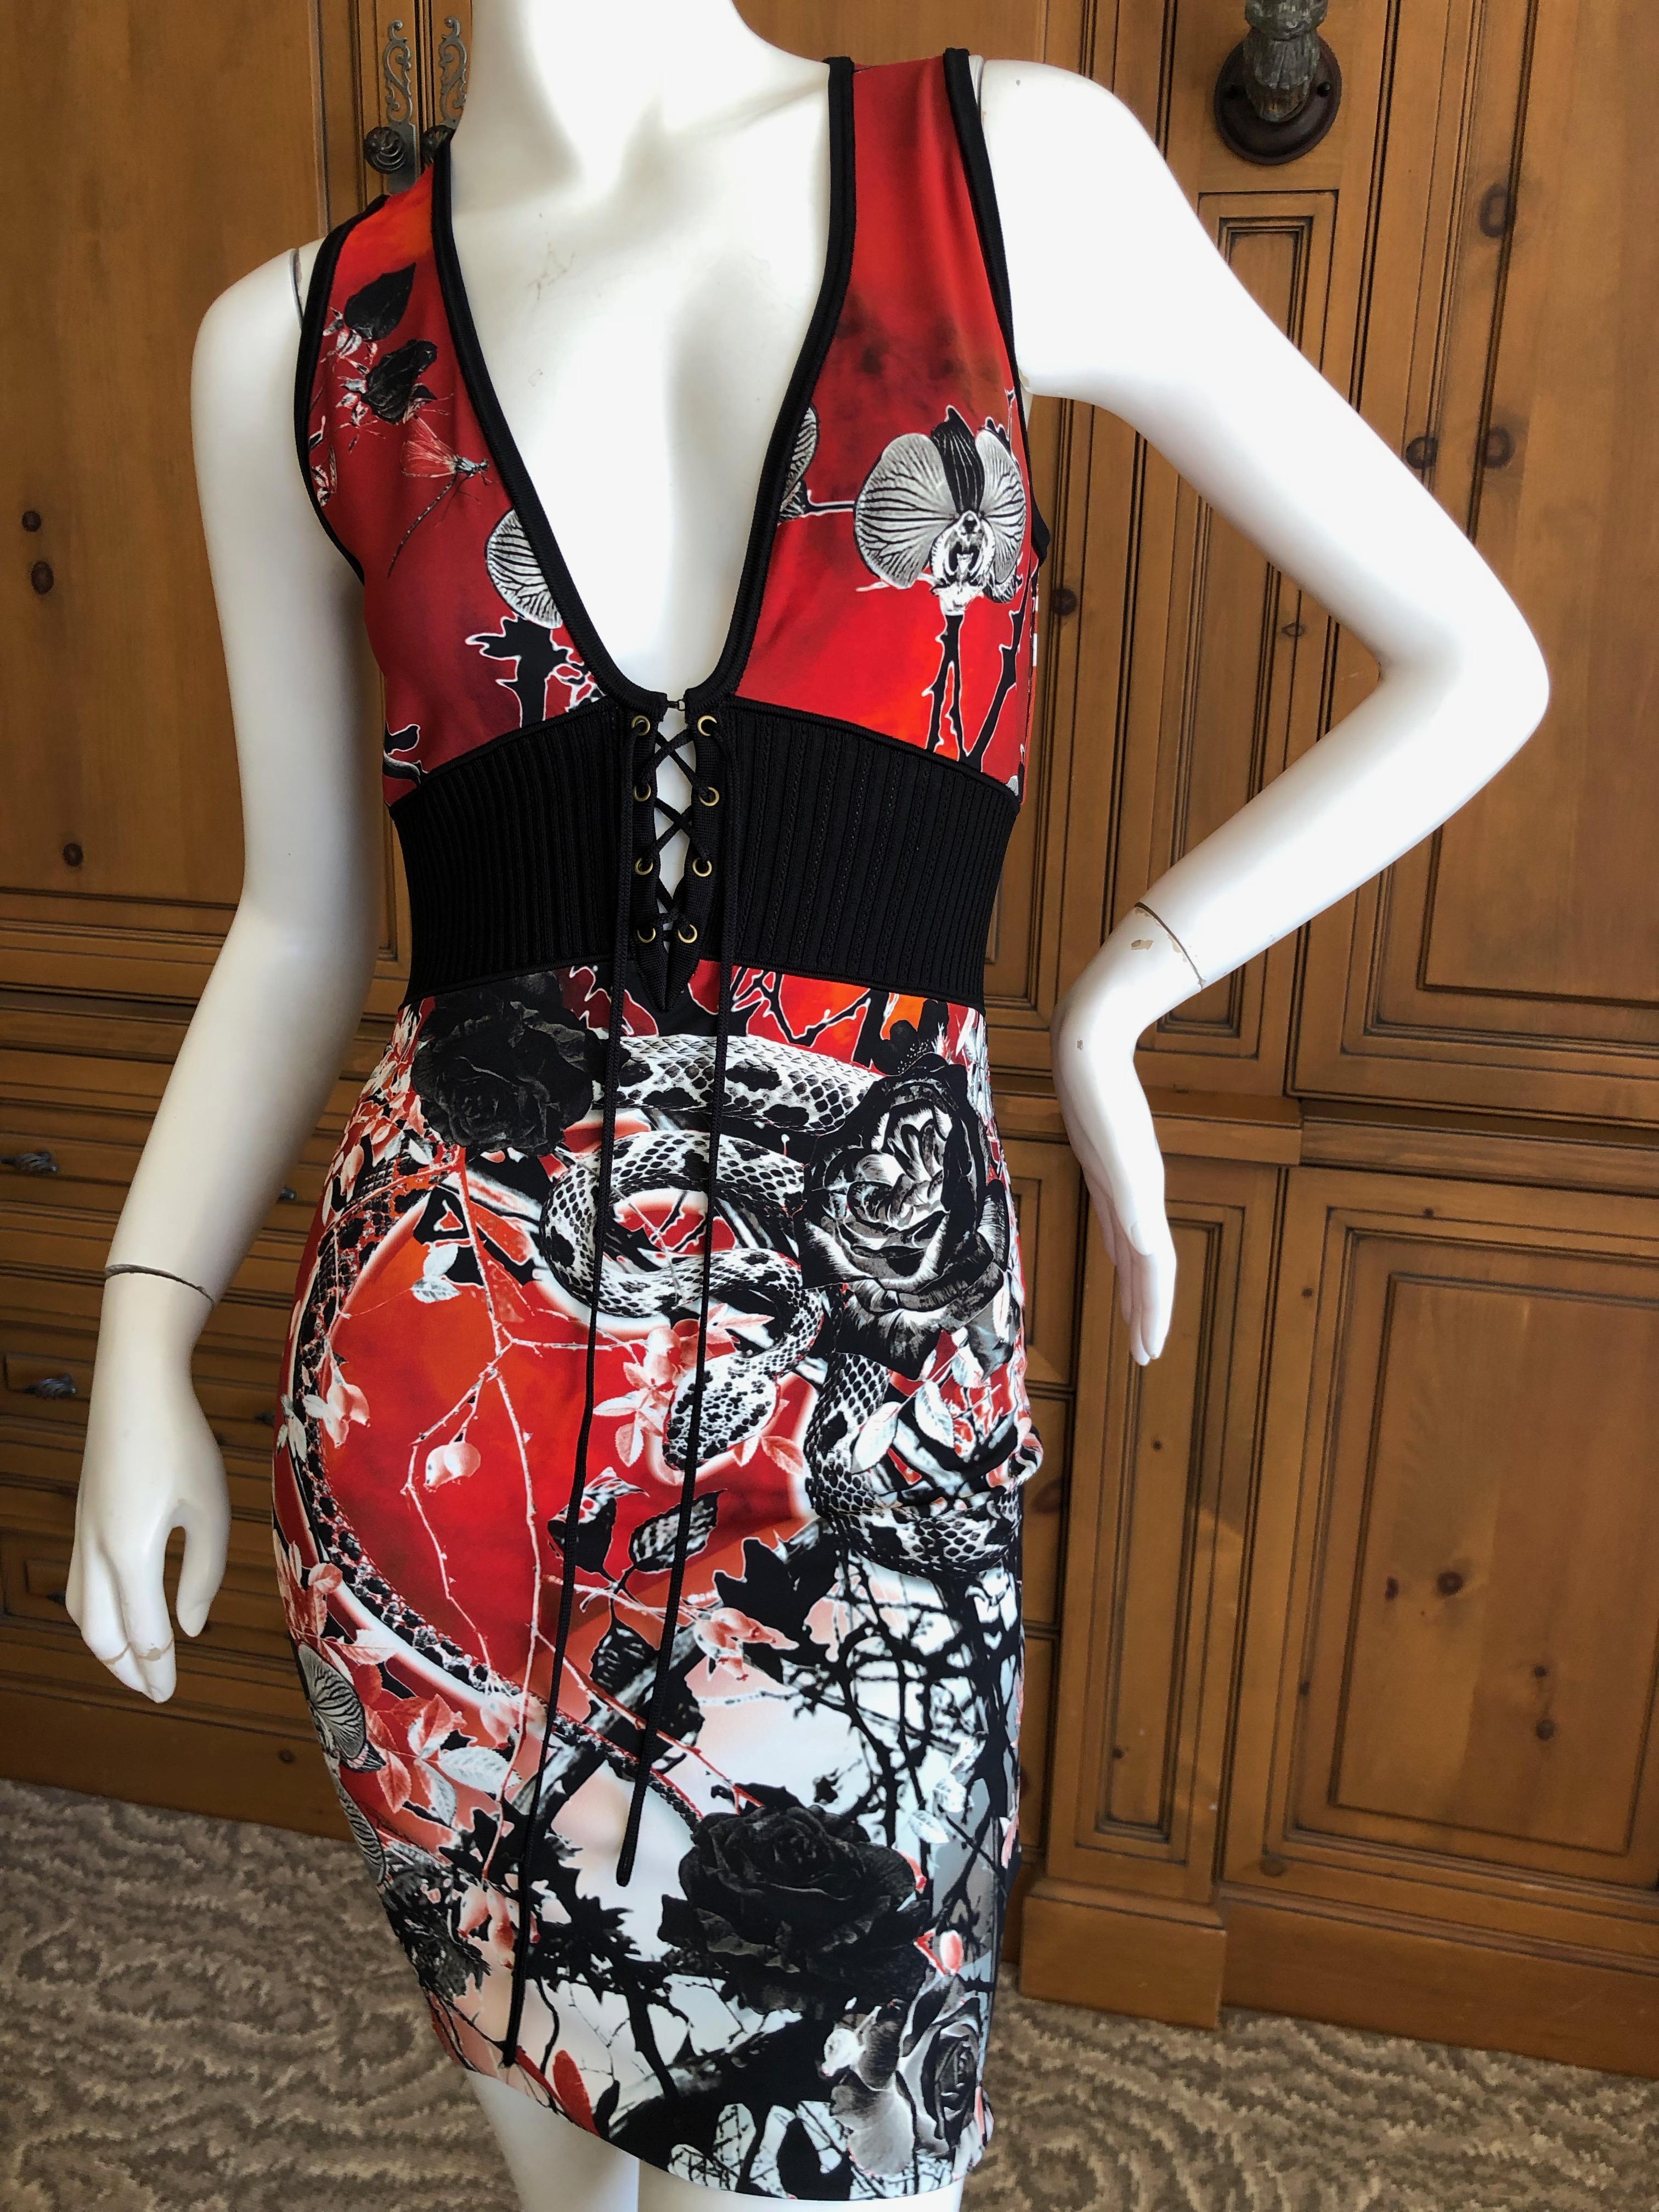 Roberto Cavalli Animal Print Low Cut Dress w Corset Laced Ribbing at the Waist In Excellent Condition For Sale In Cloverdale, CA